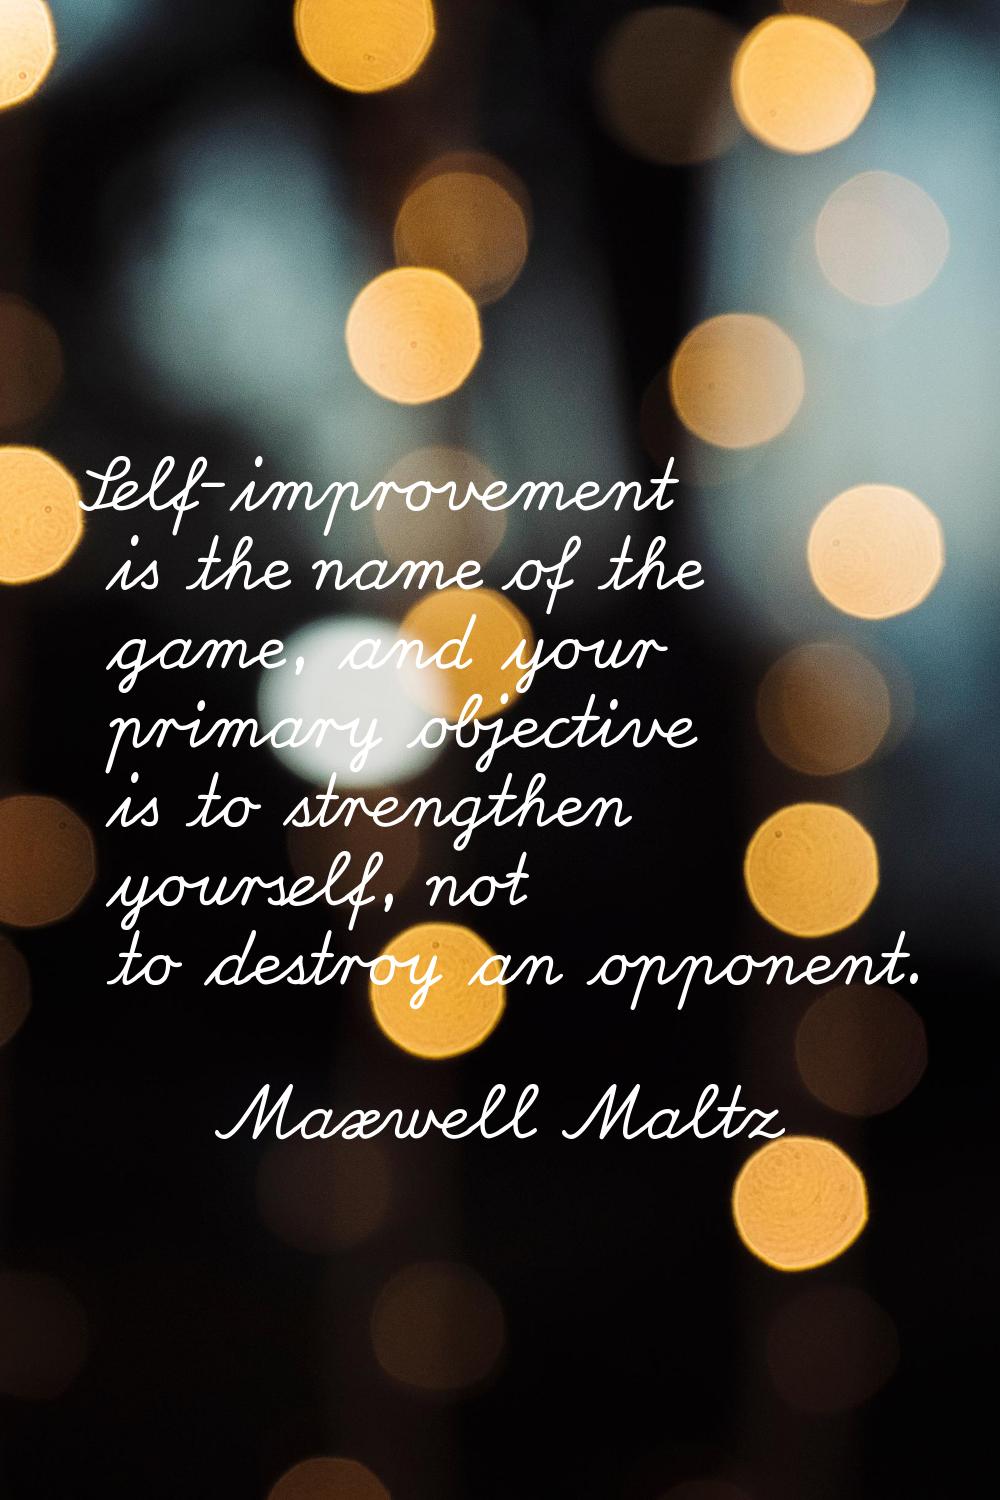 Self-improvement is the name of the game, and your primary objective is to strengthen yourself, not